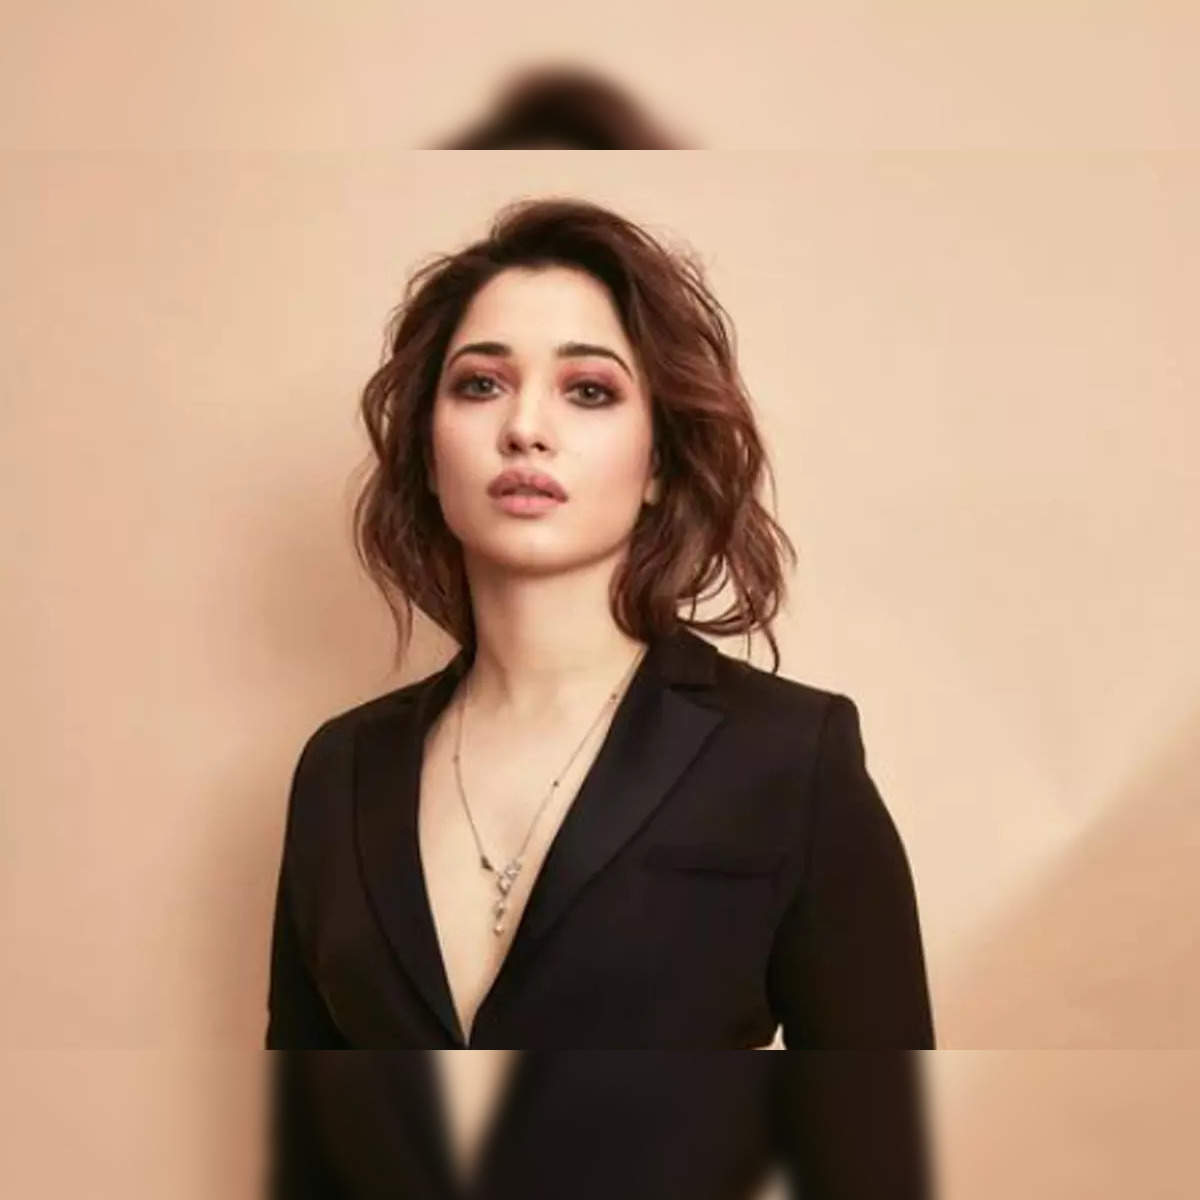 Share Chat Video Xnxx - Jee Karda Ott Release: Tamannaah Bhatia set to make her OTT debut with  Amazon Prime Video series 'Jee Karda' on June 15 - The Economic Times